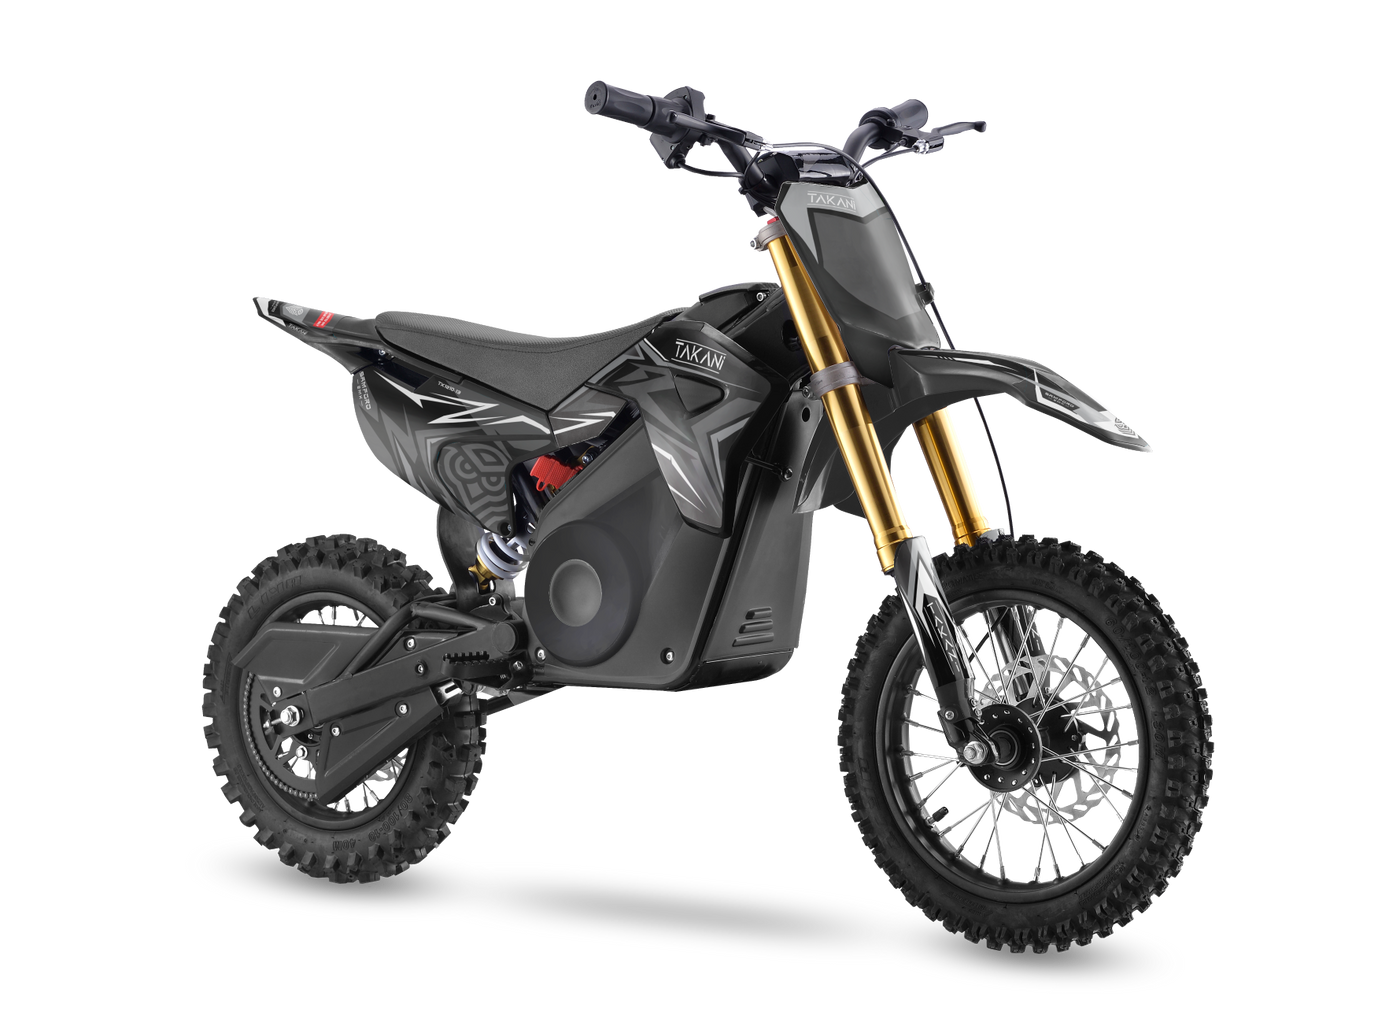 TAKANI electric motorbike for kids, this MIDI dirt bike is the perfect beginner motorbike for those looking to get into motocross or just have fun in the backyard.